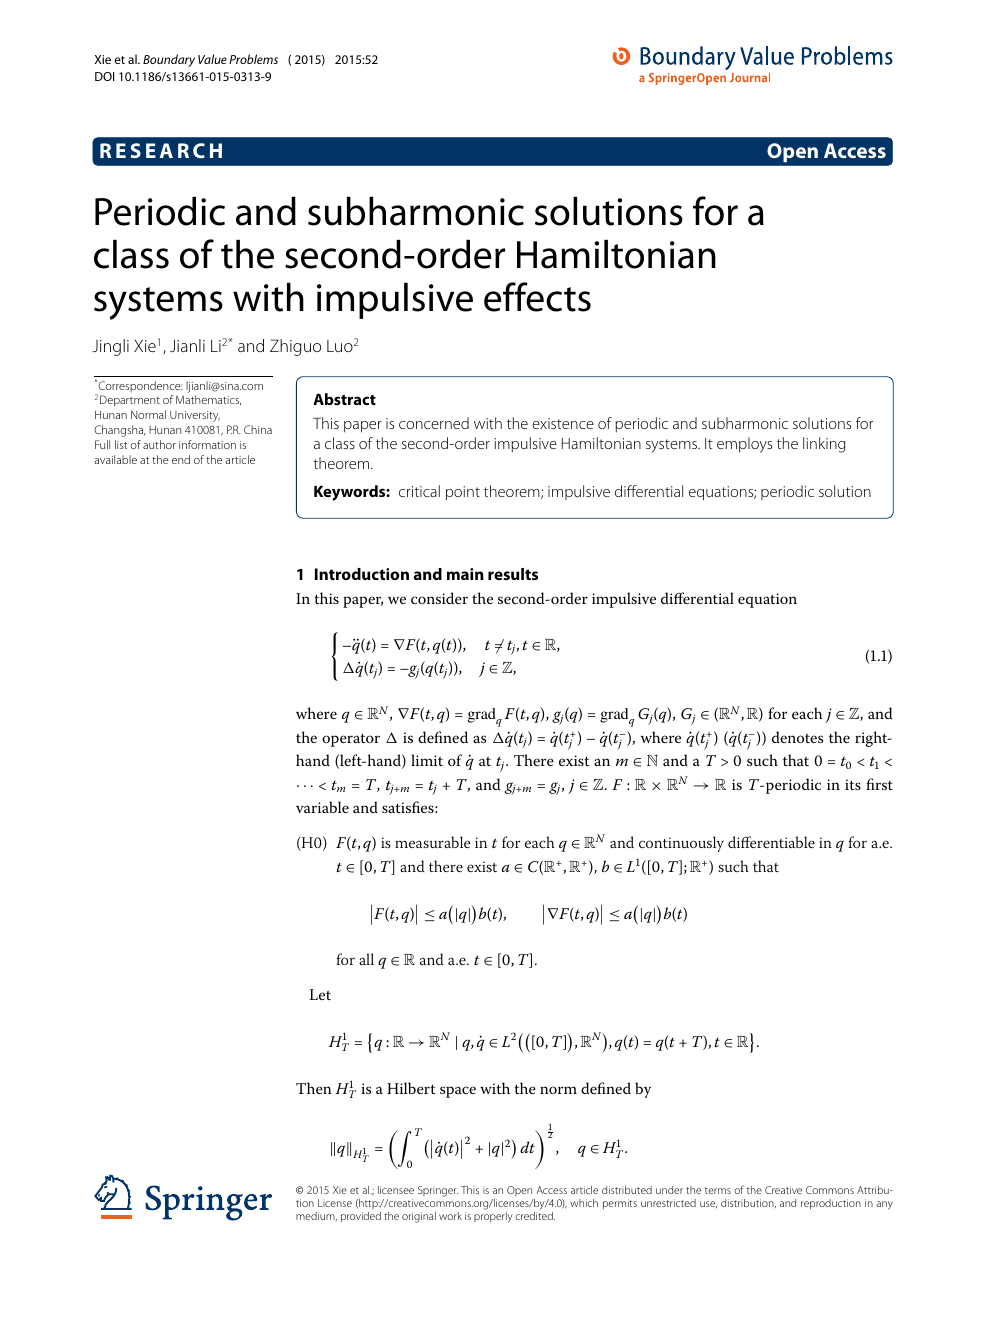 Periodic And Subharmonic Solutions For A Class Of The Second Order Hamiltonian Systems With Impulsive Effects Topic Of Research Paper In Mathematics Download Scholarly Article Pdf And Read For Free On Cyberleninka